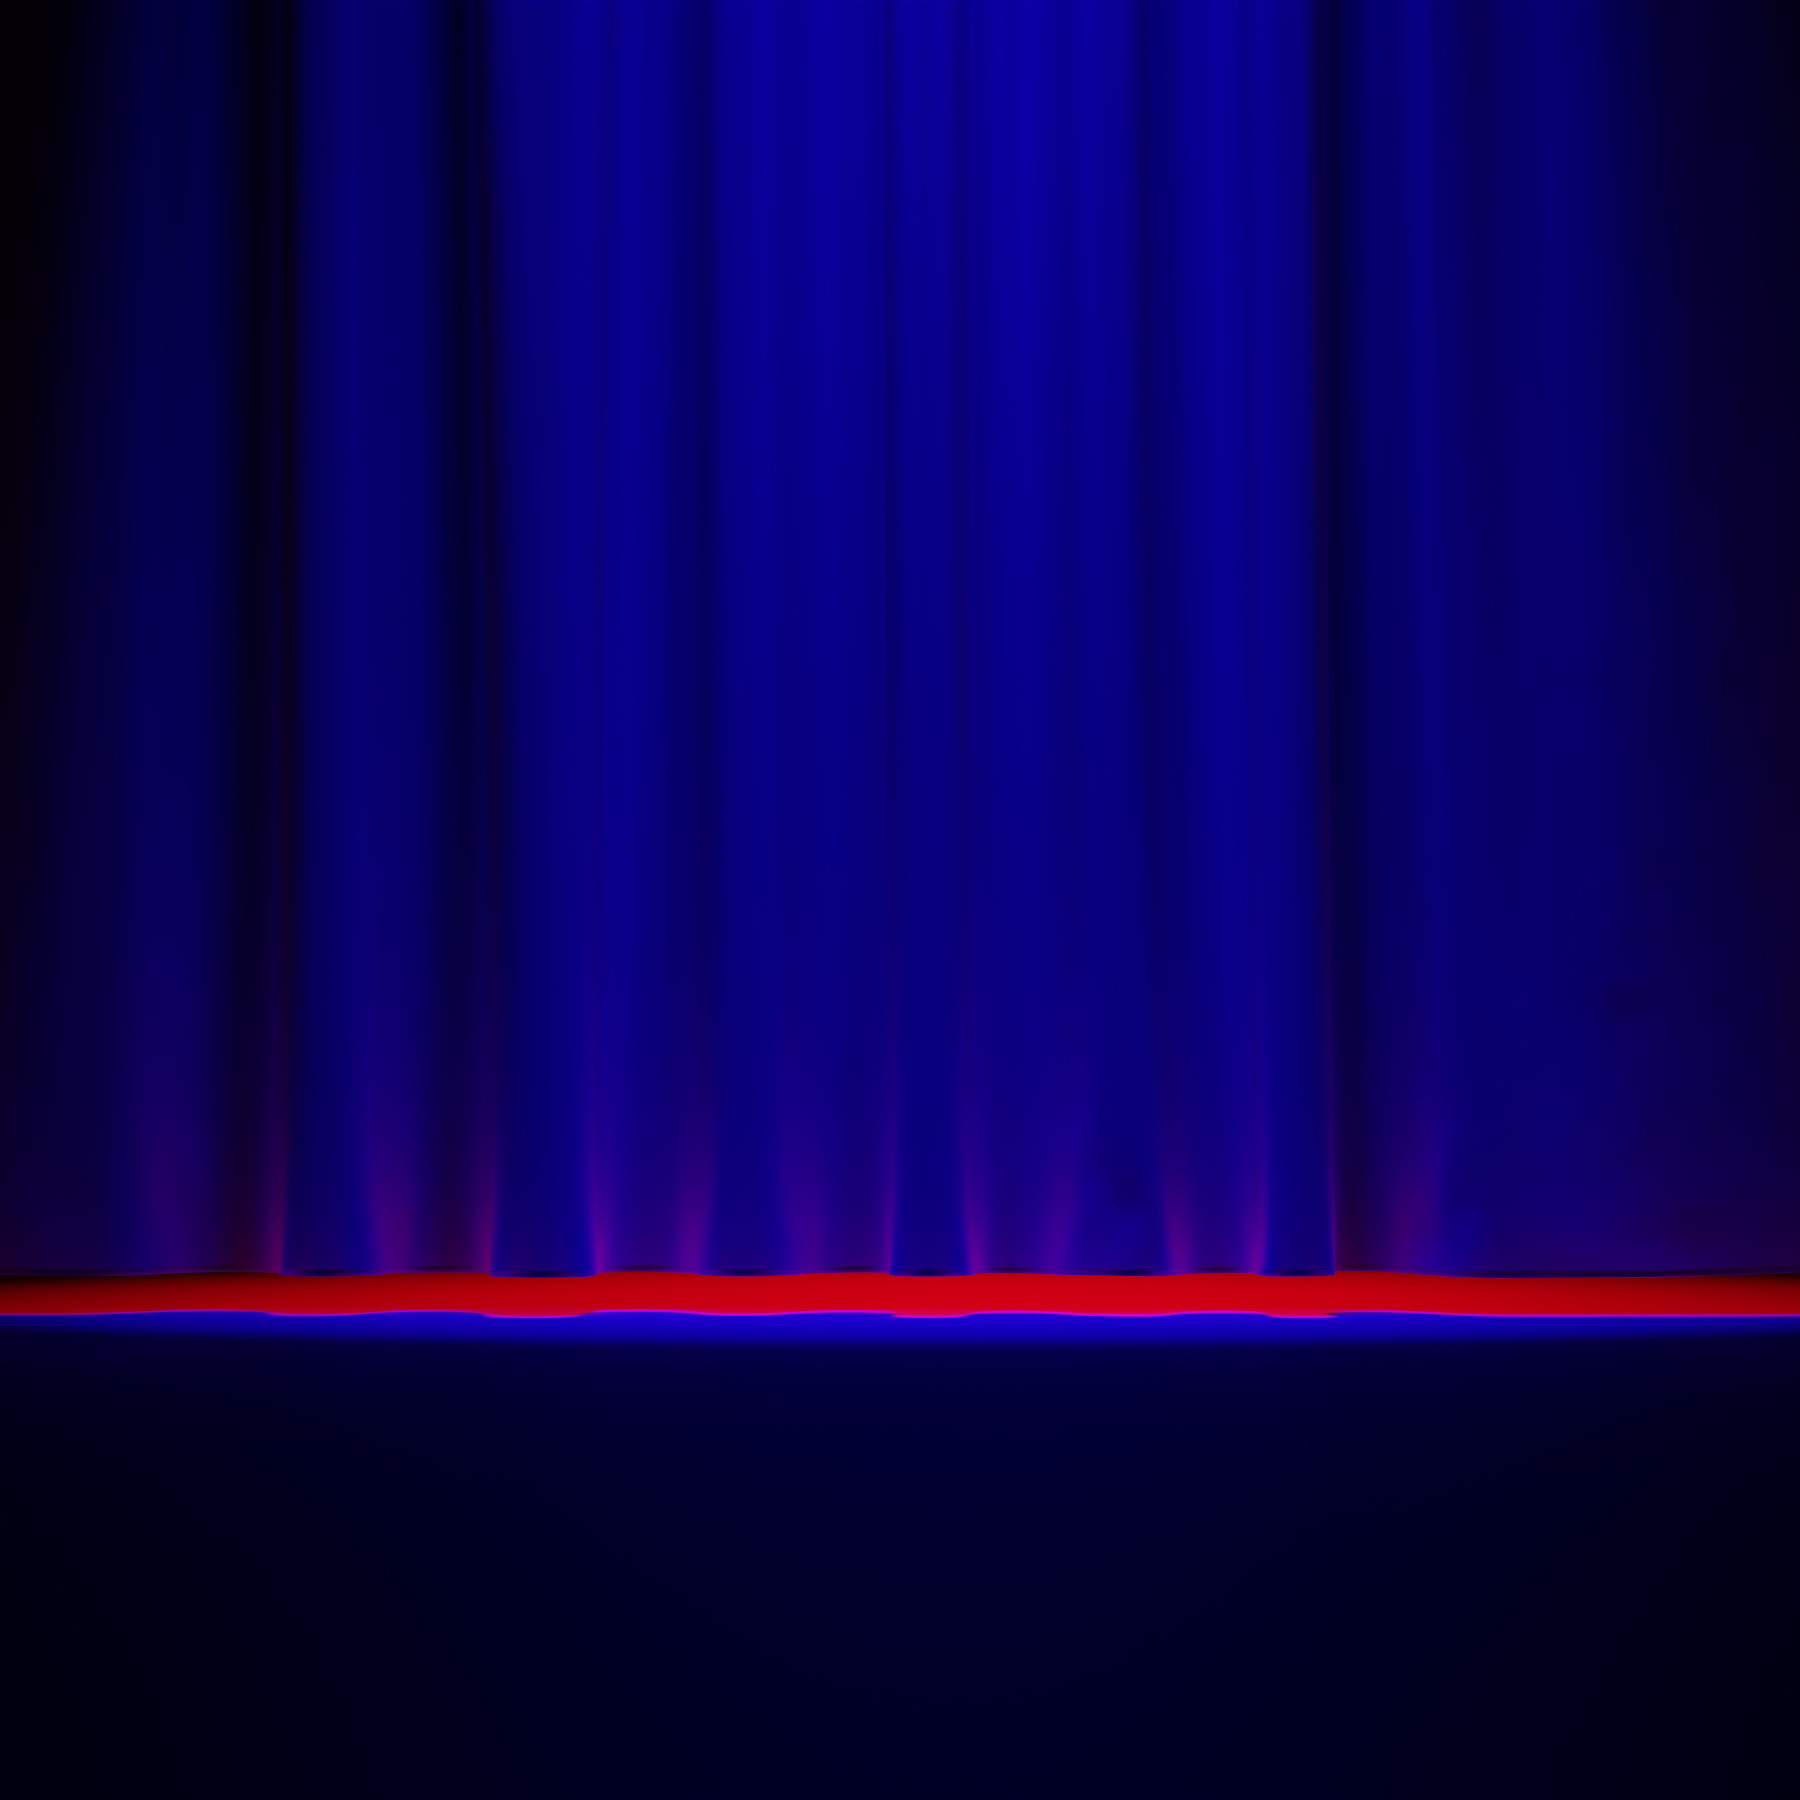 Virtual abstract scenery, Scenic abstract digital contemporary art, Raytracing, Computer-rendered image, 2022. Fine Art Print 40 x 40cm on photographic paper, mounted on Alu-Dibond®. Limited Edition 1/1. The scene is like sitting in a theater in front of a blue illuminated, still closed curtain. A strong red light shining through the gap between curtain and stage indicates that something will happen soon.